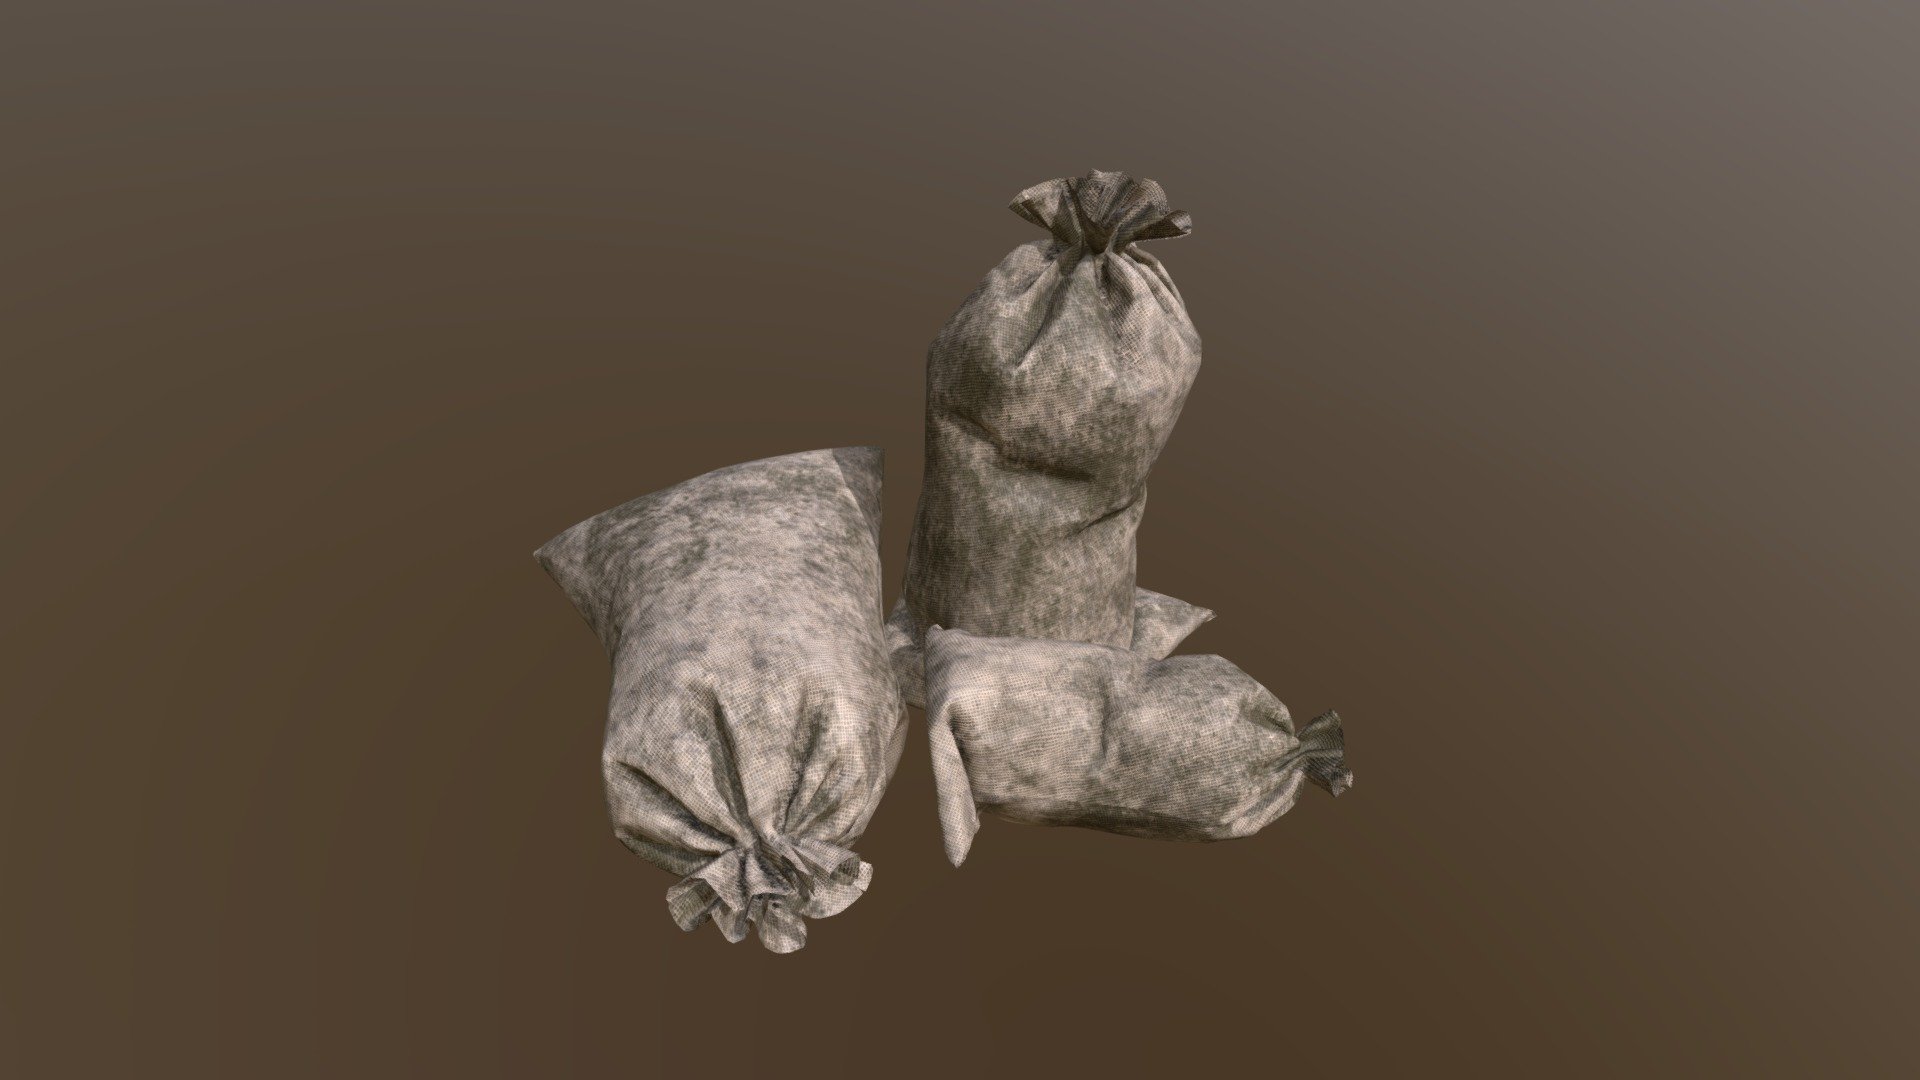 Old Burlap Bags 3D Model. This model contains the Old Burlap Bags itself 

All modeled in Maya, textured with Substance Painter.

The model was built to scale and is UV unwrapped properly. Contains only one 4K texture set.  

⦁   16004 tris. 

⦁   Contains: .FBX .OBJ and .DAE

⦁   Model has clean topology. No Ngons.

⦁   Built to scale

⦁   Unwrapped UV Map

⦁   4K Texture set

⦁   High quality details

⦁   Based on real life references

⦁   Renders done in Marmoset Toolbag

Polycount: 

Verts 8478

Edges 16485

Faces 8013

Tris 16004

If you have any questions please feel free to ask me 3d model